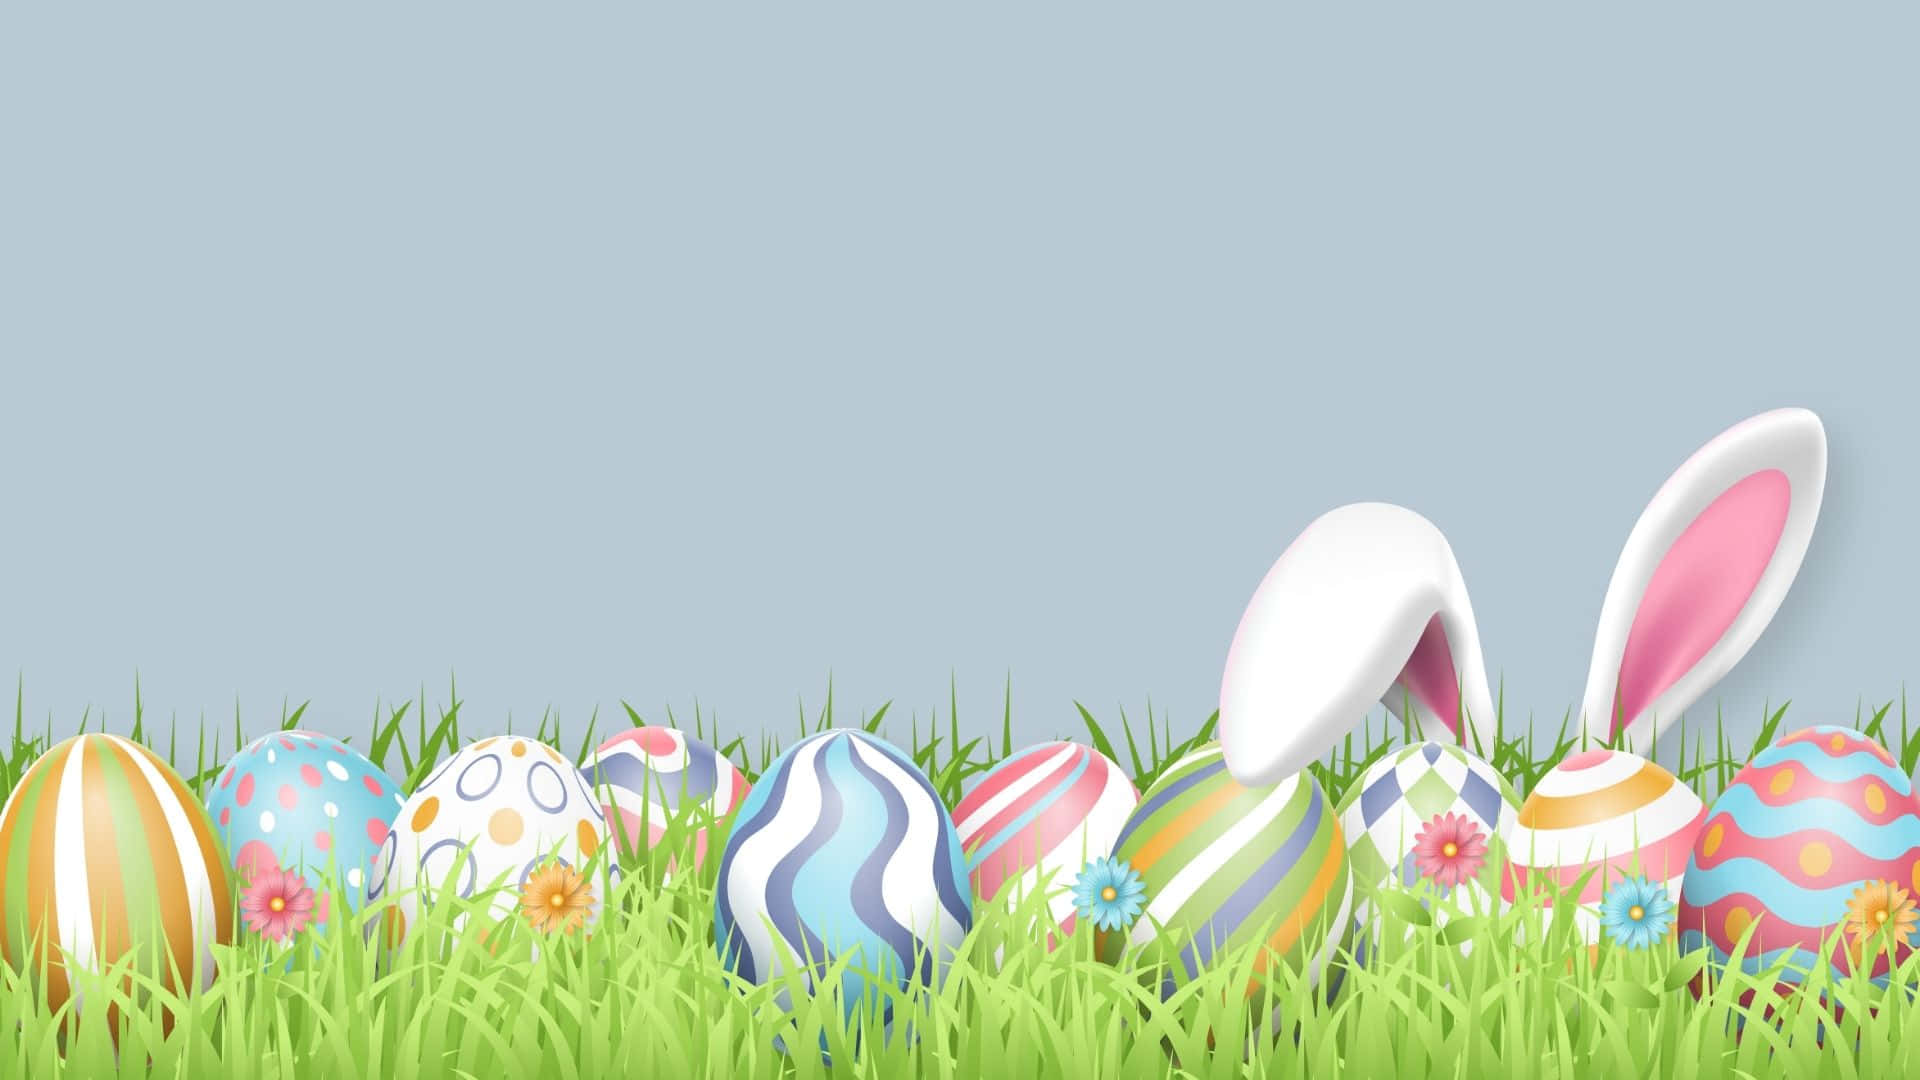 Easter Eggs In Grass With Bunny Ears Wallpaper